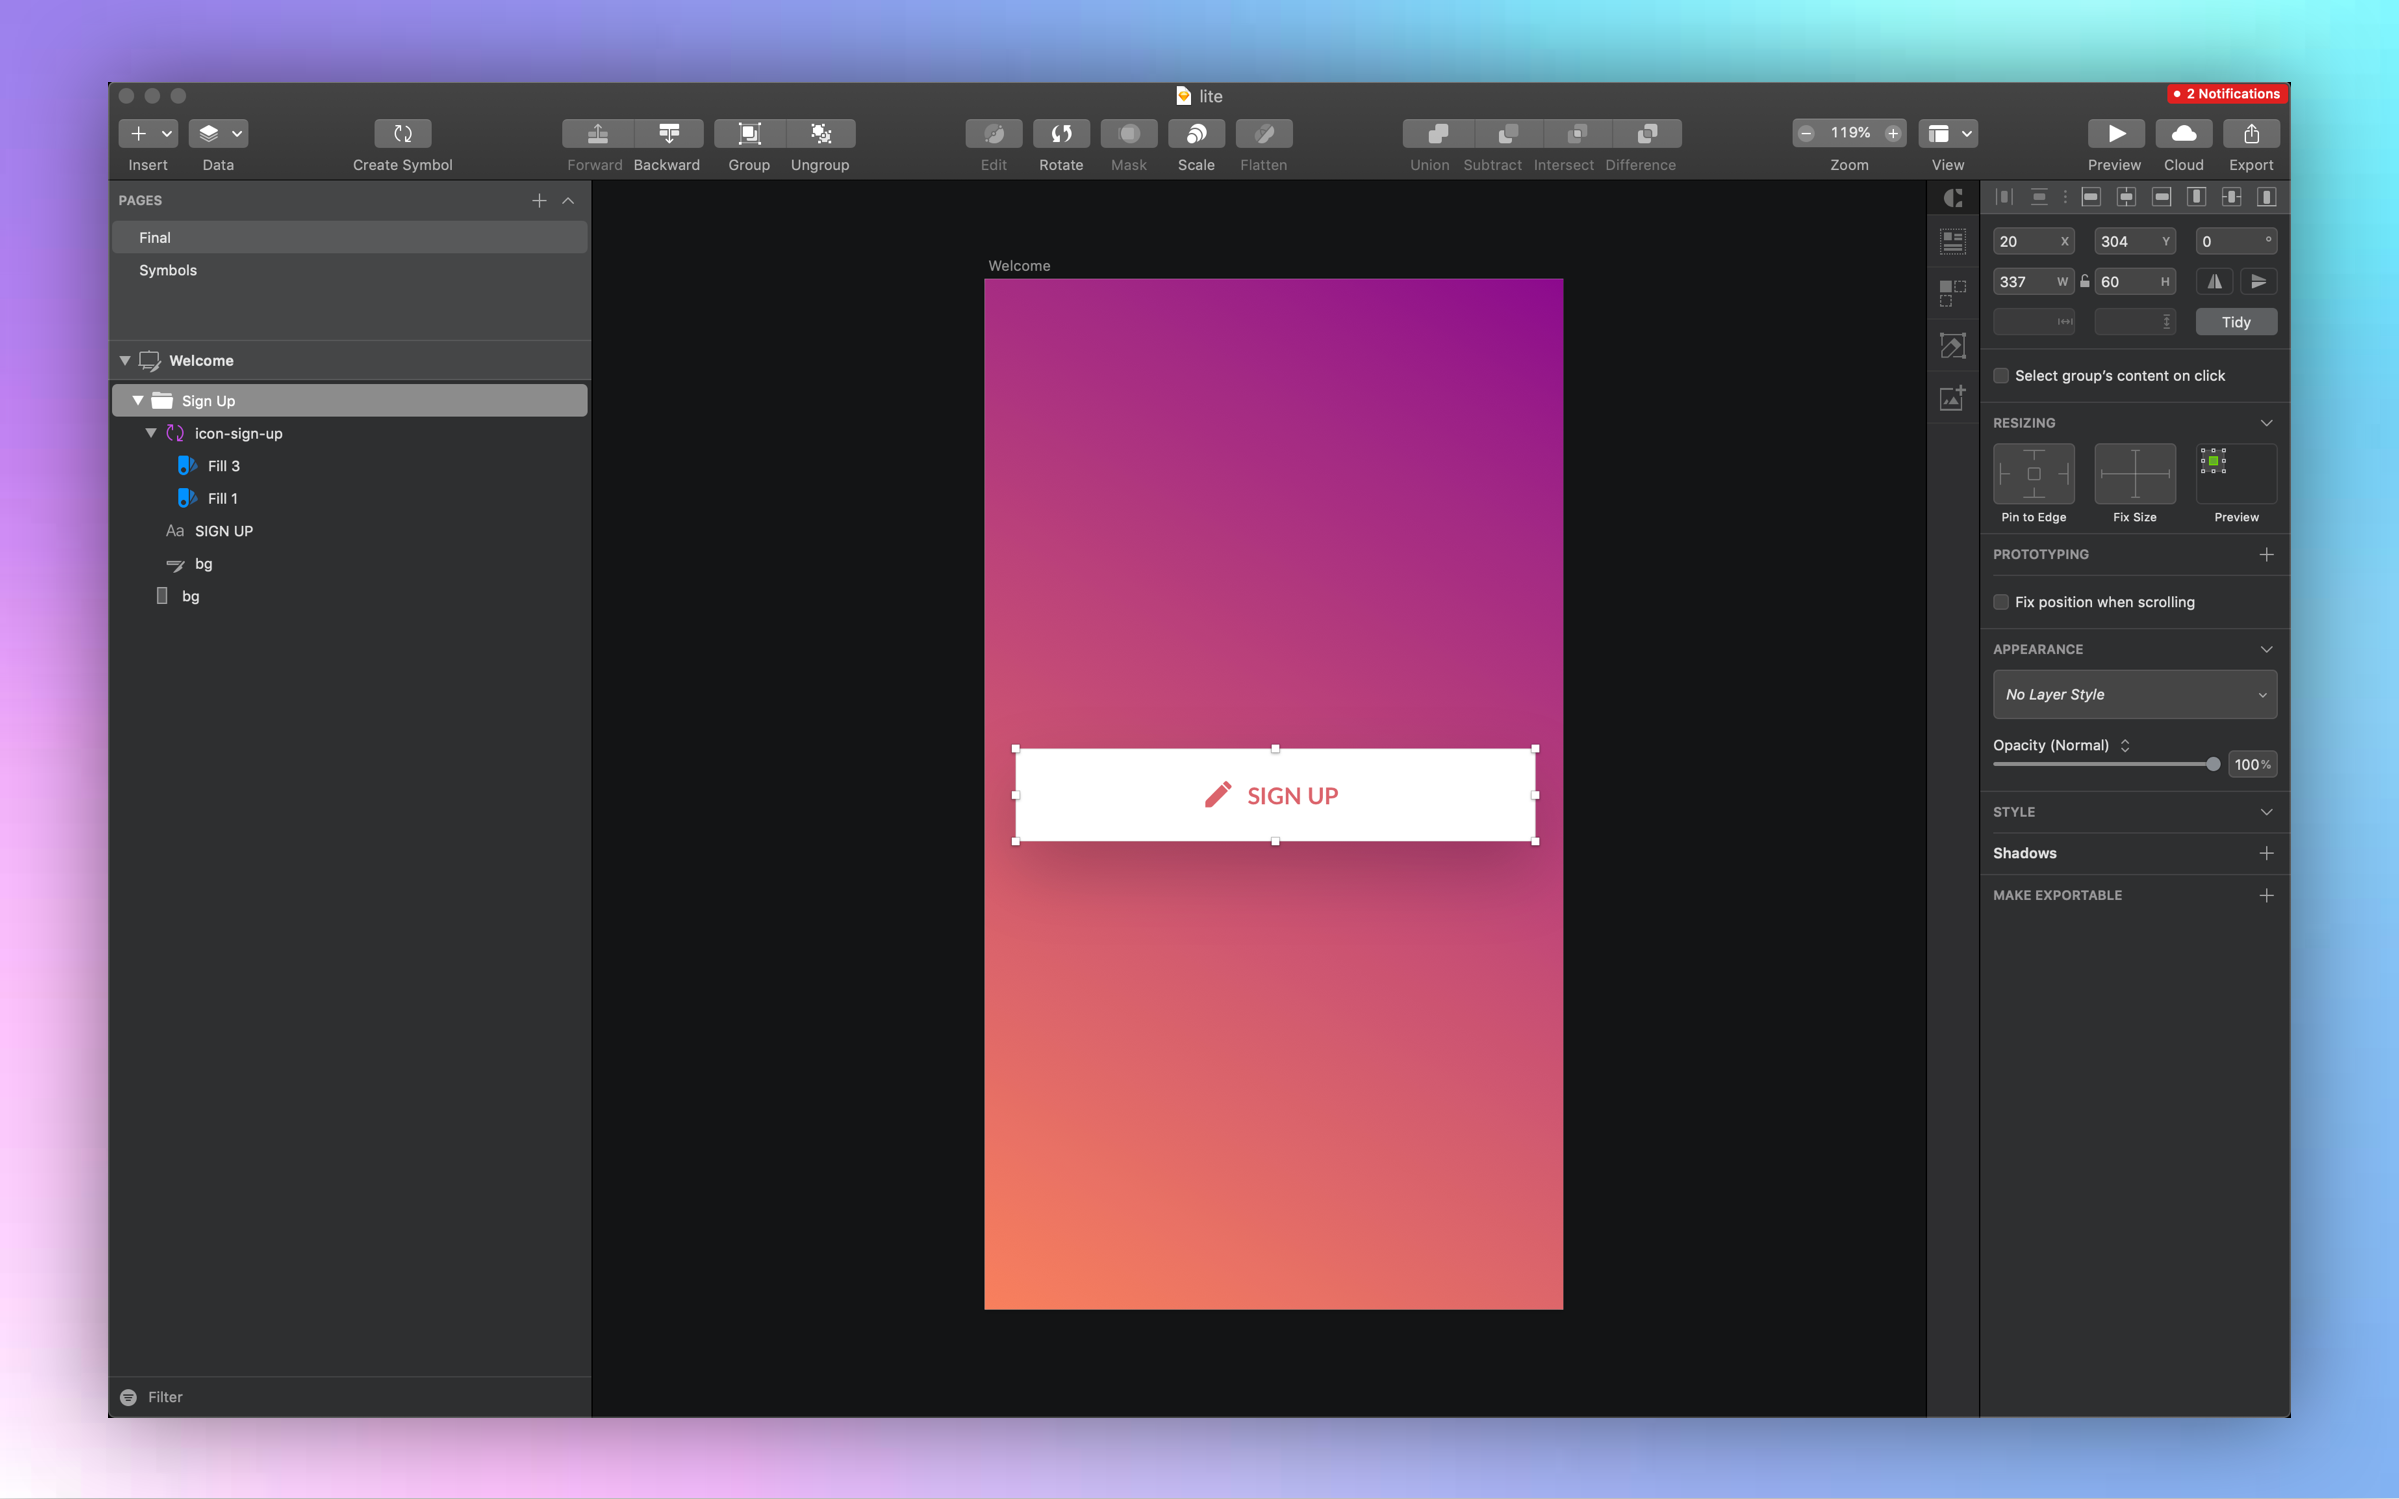 Sketch represents elements visually without any additional functionality